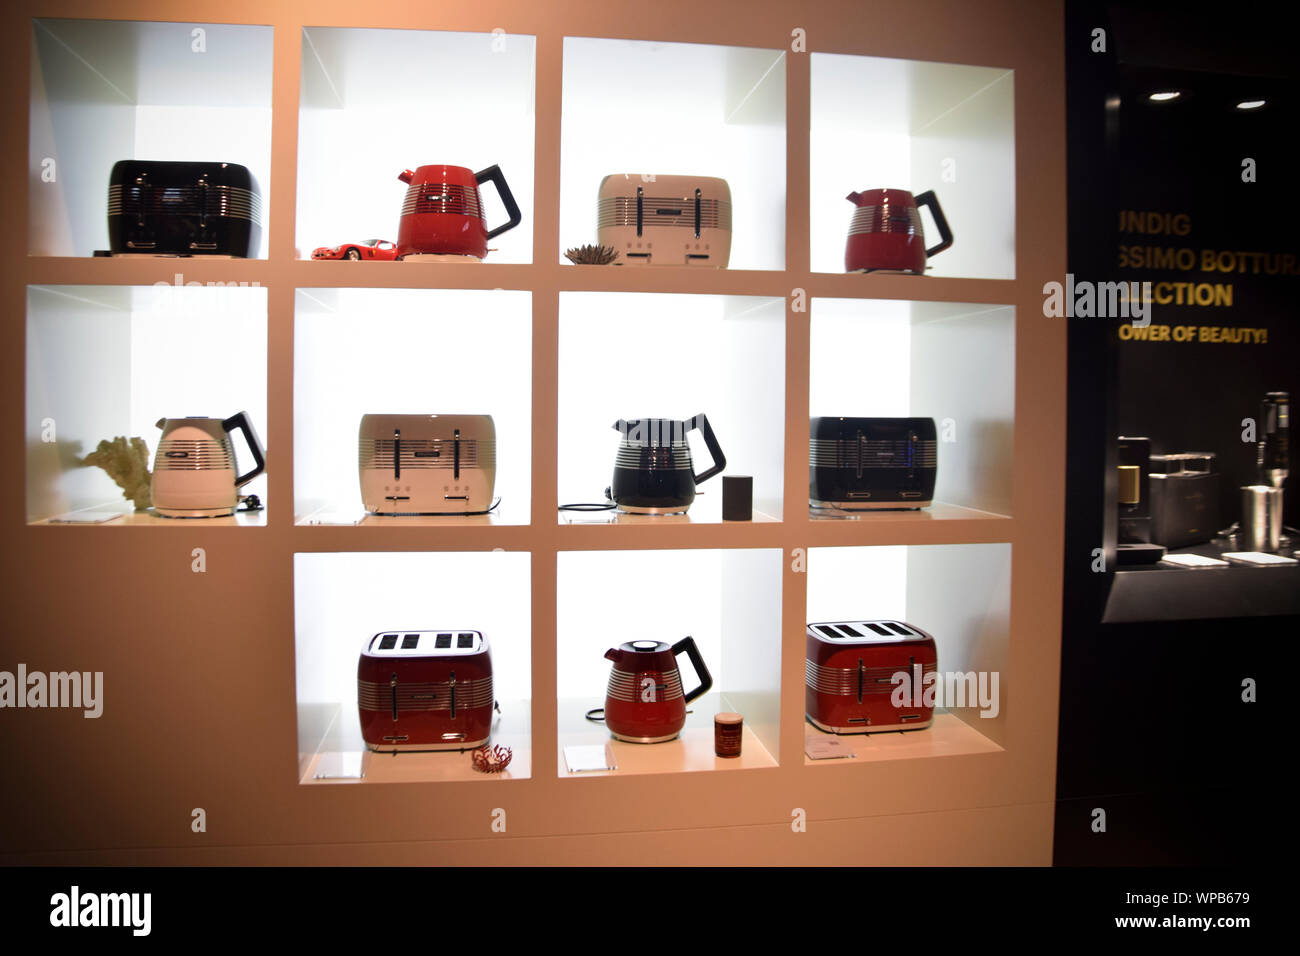 Berlin, Germany – September 6th, 2019: Grundig Retro Collection of kitchen appliances at IFA 2019 Stock Photo